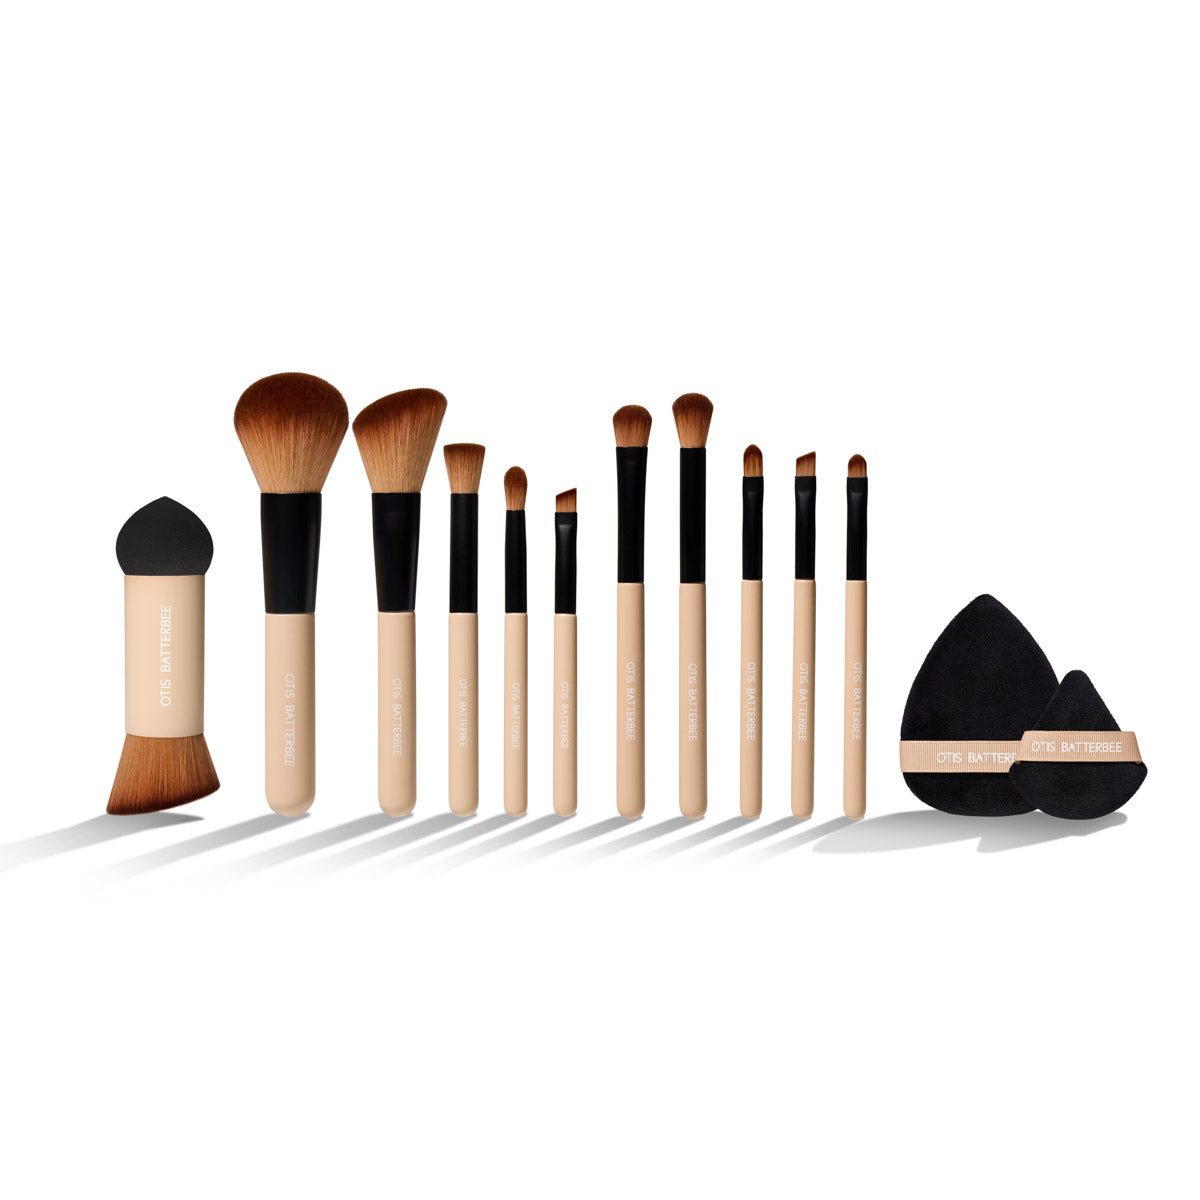 Otis Batterbee Makeup Brush Set: Explore endless possibilities with our curated collection, featuring The Eye Brush Set. Unleash your creativity with these five versatile brushes, offering a perfect blend of softness and density for mesmerizing eye looks. The Face Brush Set comprises five essential brushes for seamless application of blushers, powders, and even lips, ensuring a flawless finish. Elevate your makeup routine with The Powder Puff Duo, featuring two sizes for achieving an invisible look and setting powders for a camera-ready finish. Experience innovation with The Rocket Blender Brush – a dual-function beauty tool combining the benefits of a blending sponge and a makeup brush. Ideal for blending foundation and powders on-the-go, this set is your key to effortless beauty.